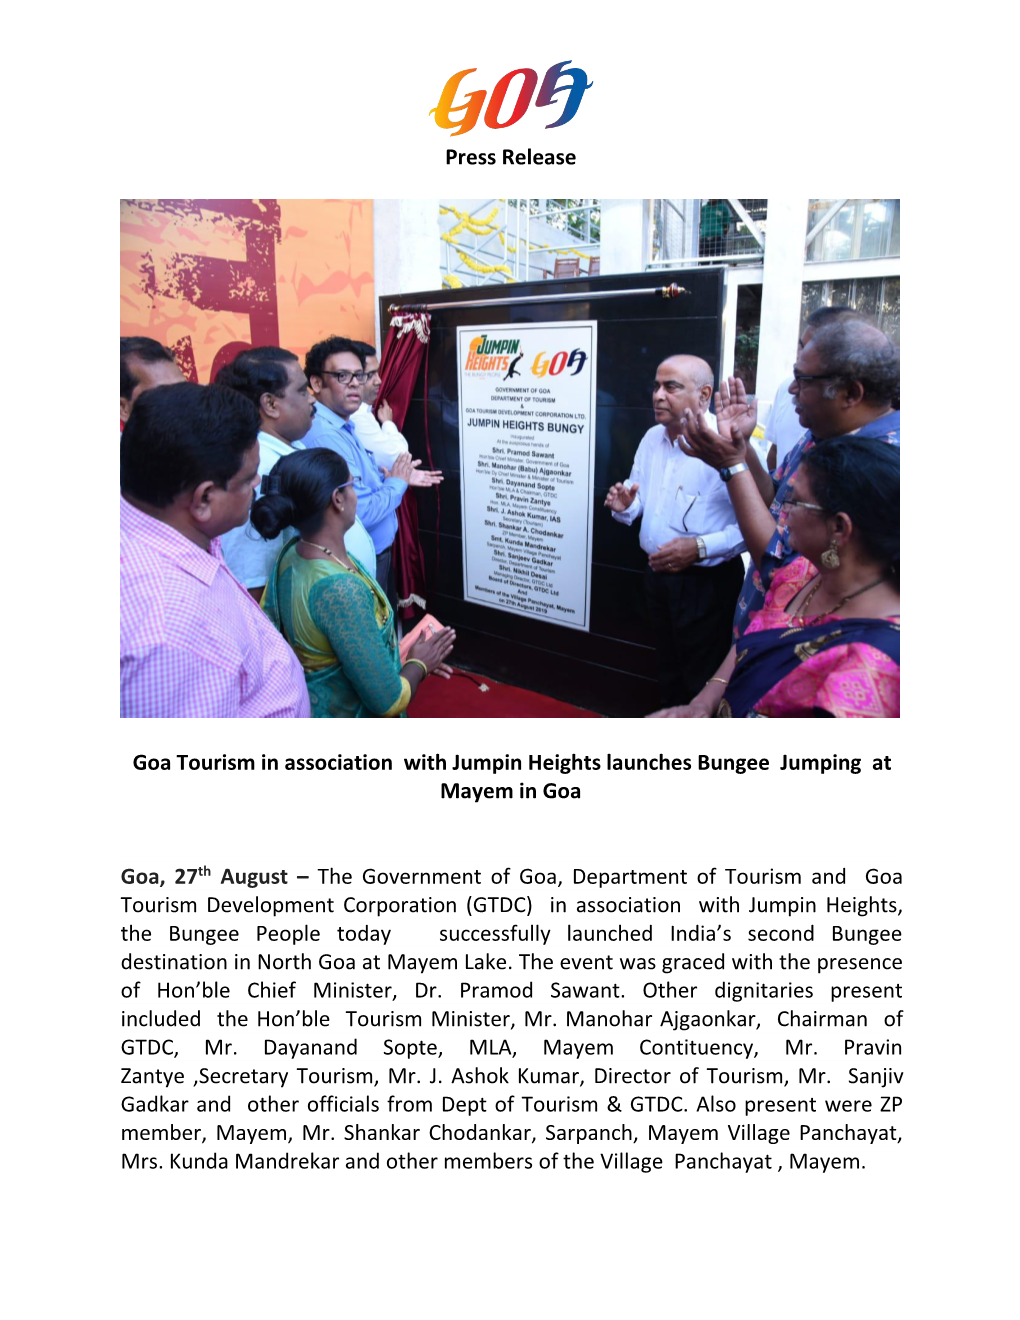 Press Release Goa Tourism in Association with Jumpin Heights